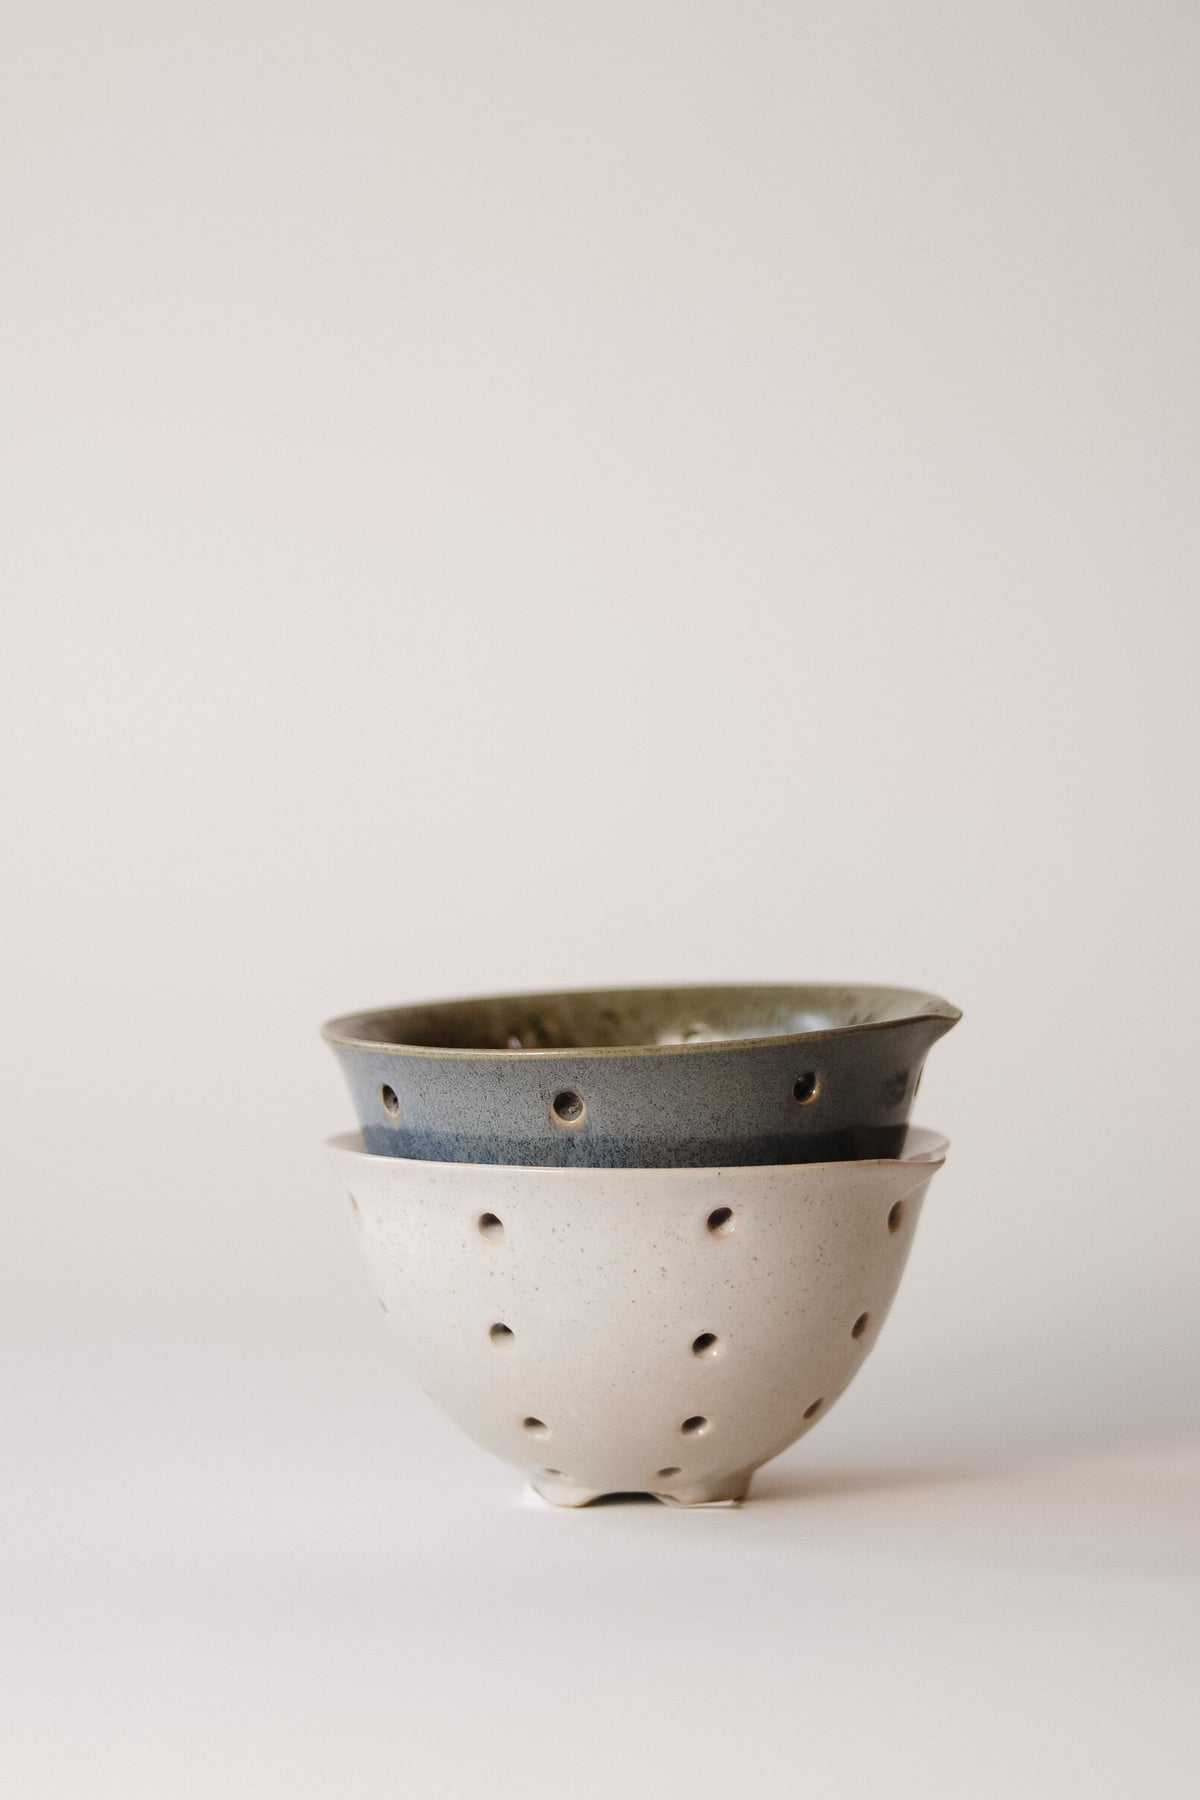 A rustic stoneware bowl designed for collecting and washing a variety of berries.